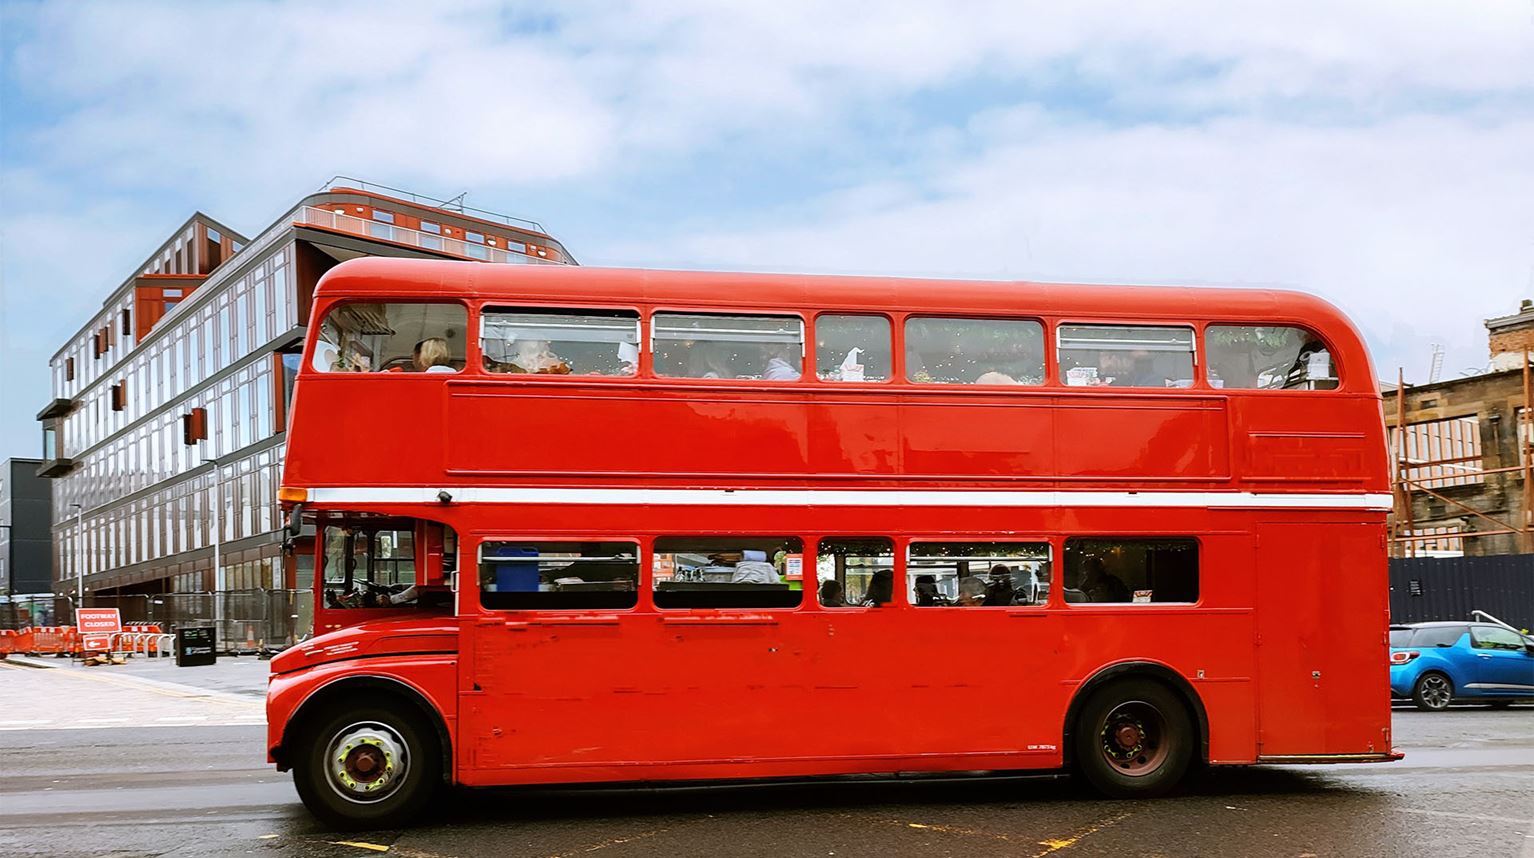 Side view of vintage red double decker bus